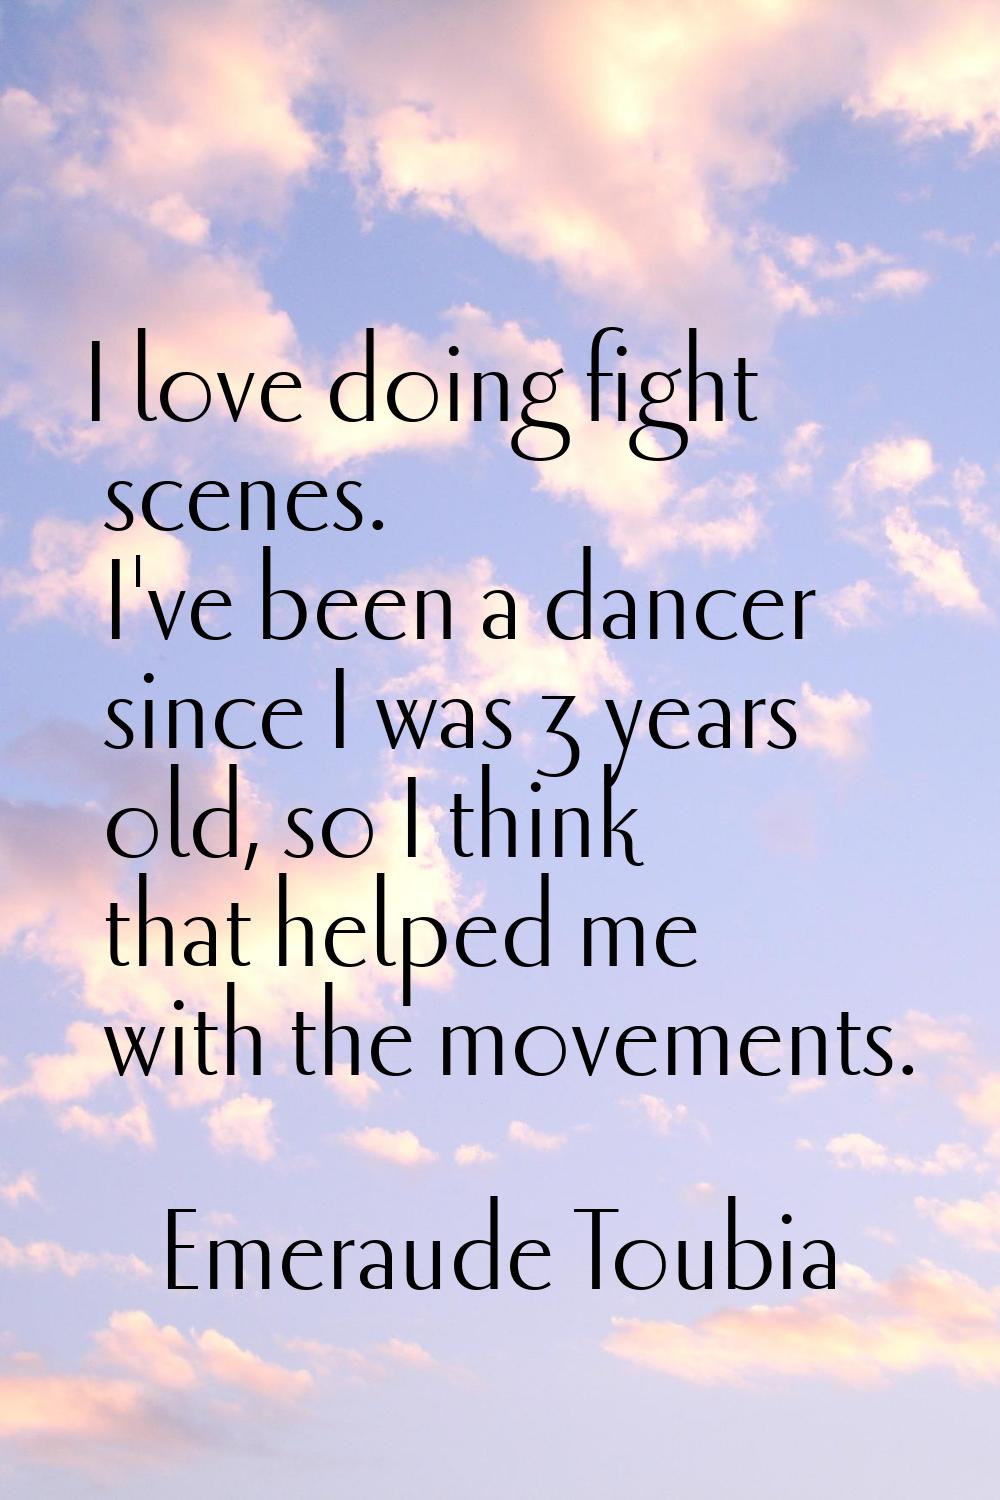 I love doing fight scenes. I've been a dancer since I was 3 years old, so I think that helped me wi